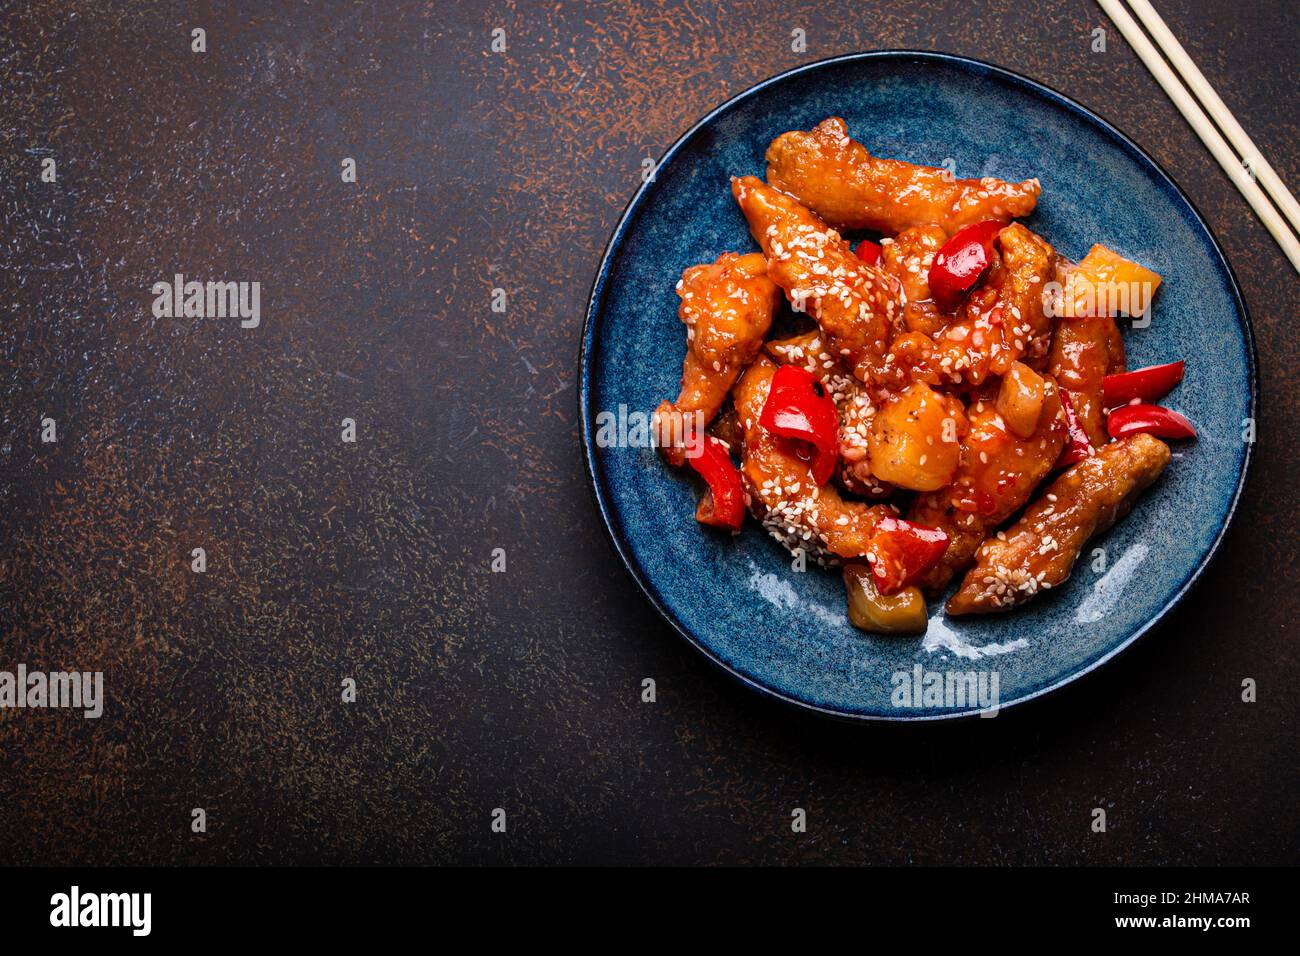 Chinese traditional wok dish sweet and sour deep fried chicken with vegetables stir-fry on plate Stock Photo